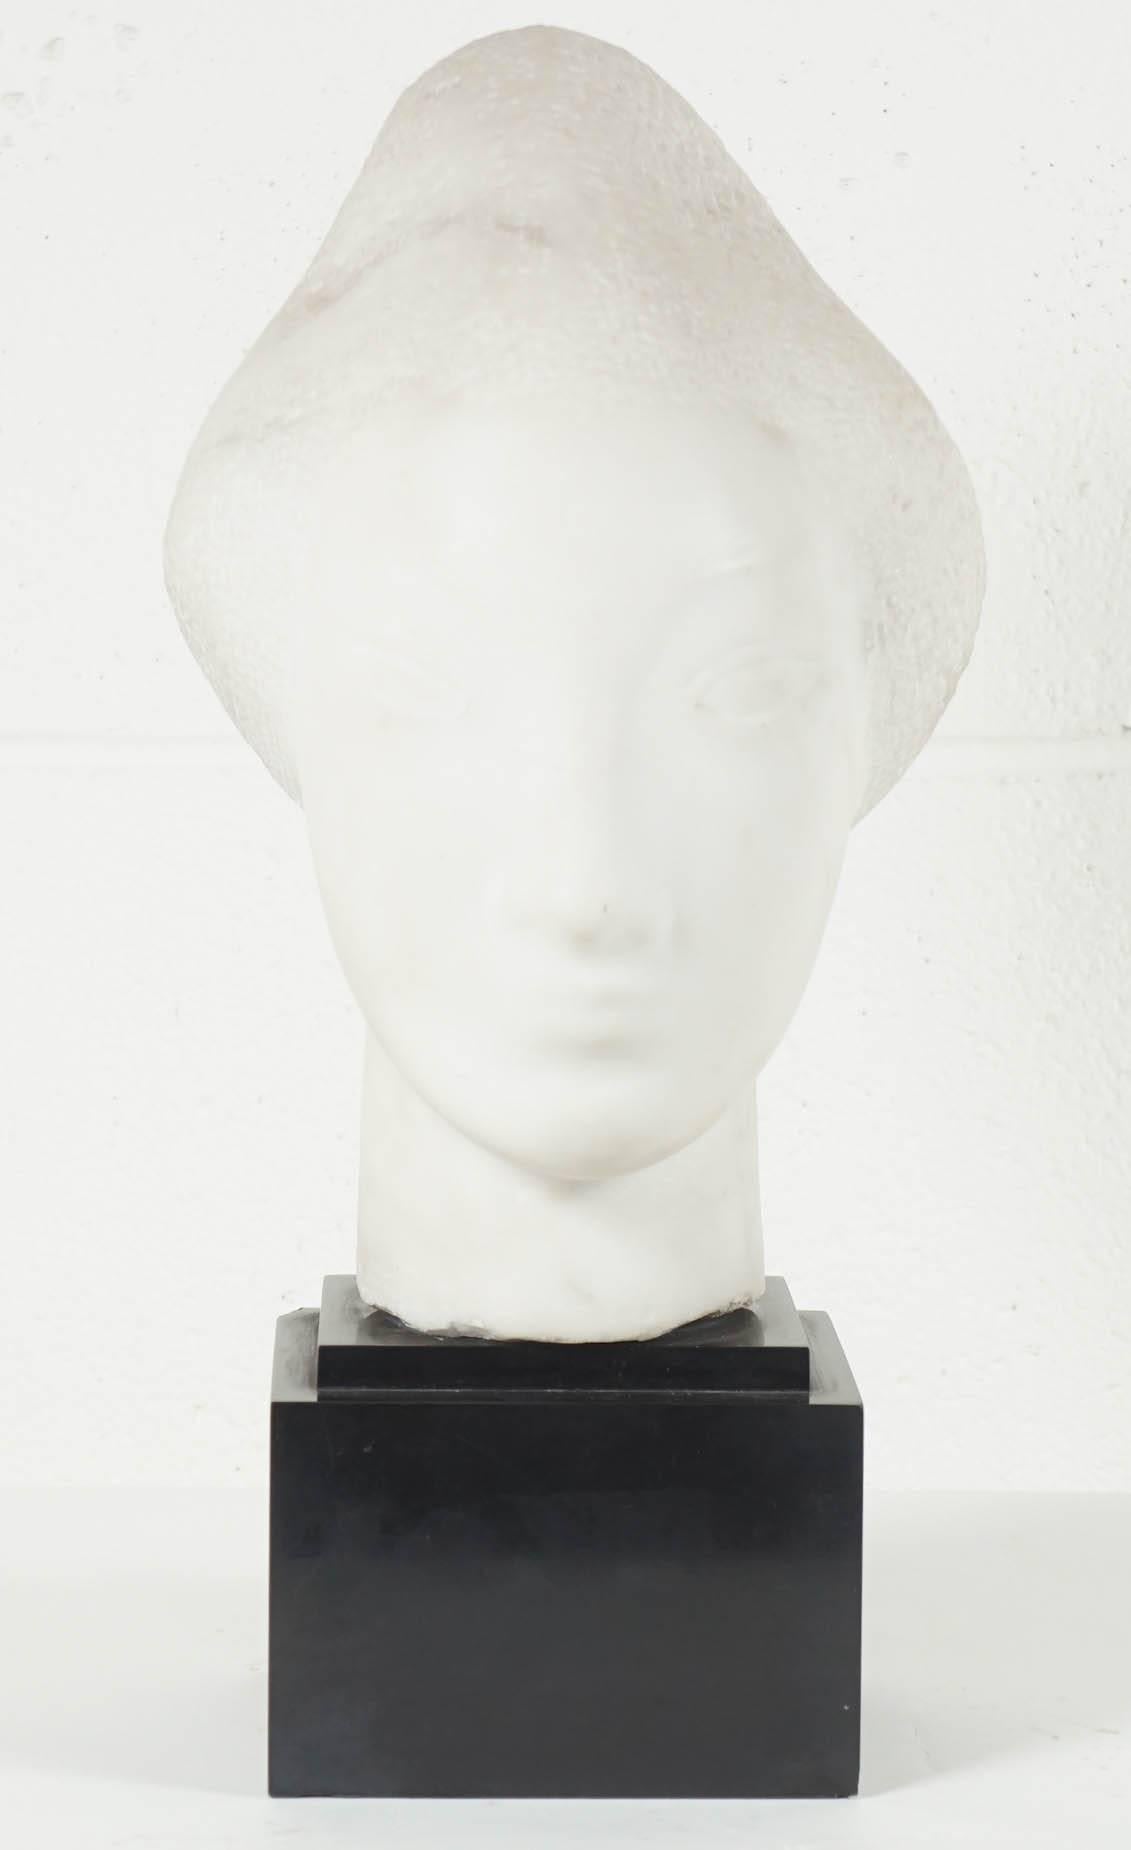 Here is a beautiful sculpture of a female head mounted on a solid black stone base. The piece is highly stylized and the formed hair has a textured quality that contrasts the smooth surface of the face. There is an incised signature on the side of